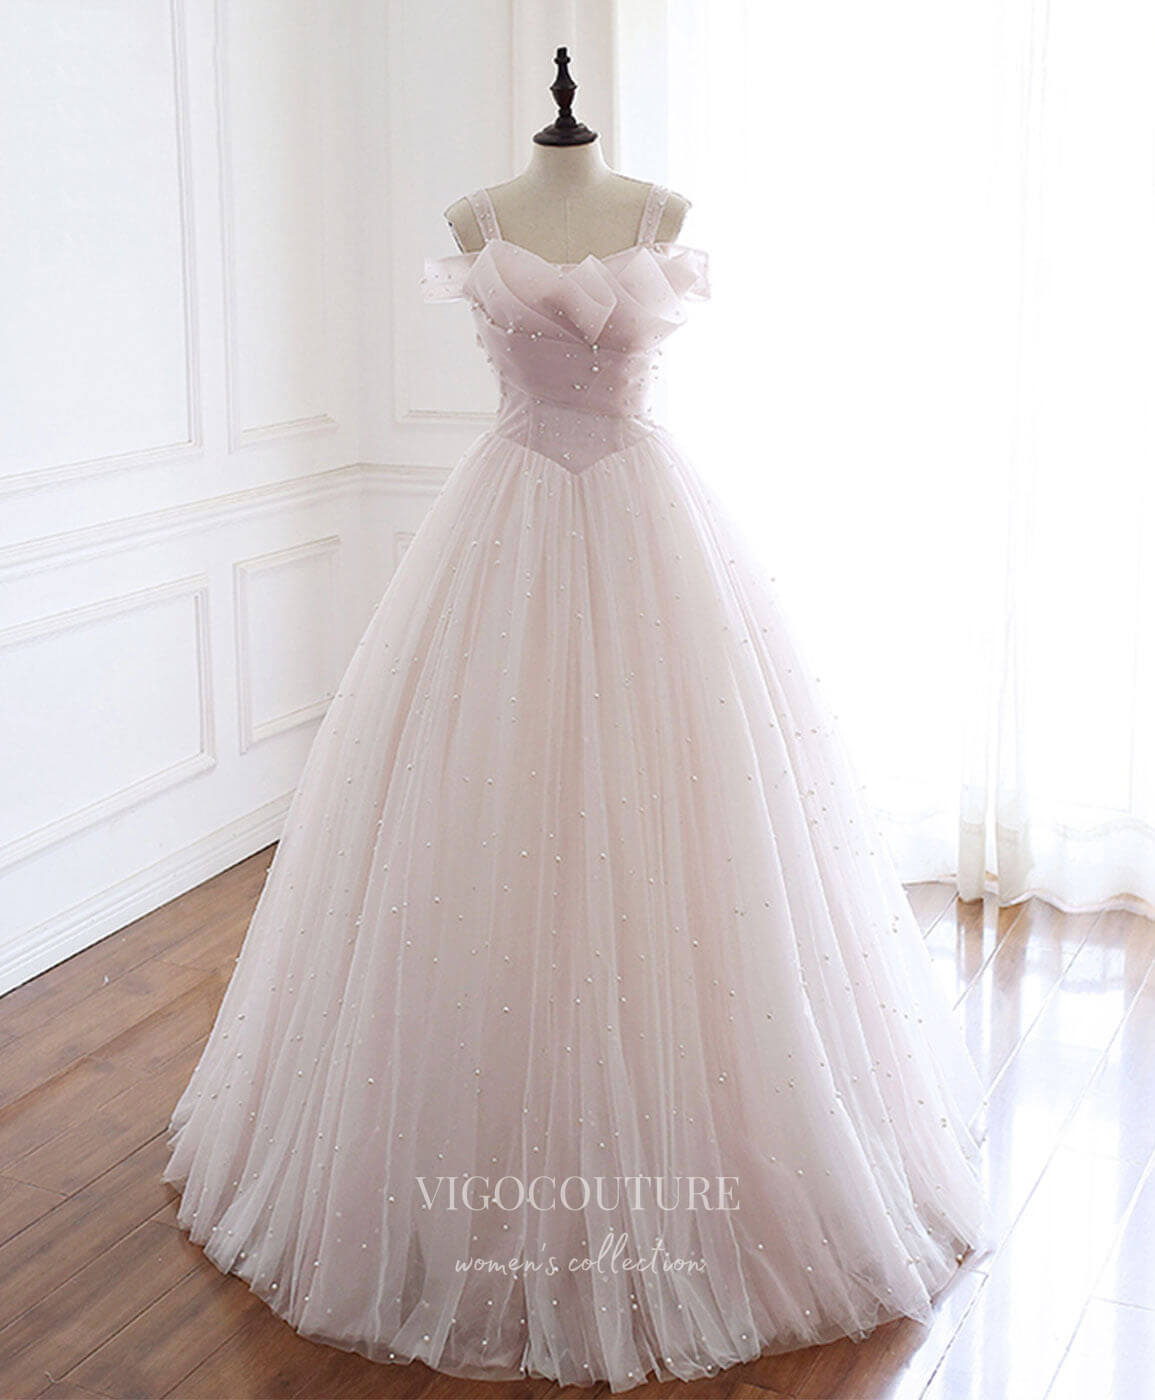 Blush Pink Tulle Prom Dresses Beaded A-Line Evening Dress 21817-Prom Dresses-vigocouture-Blush-US2-vigocouture